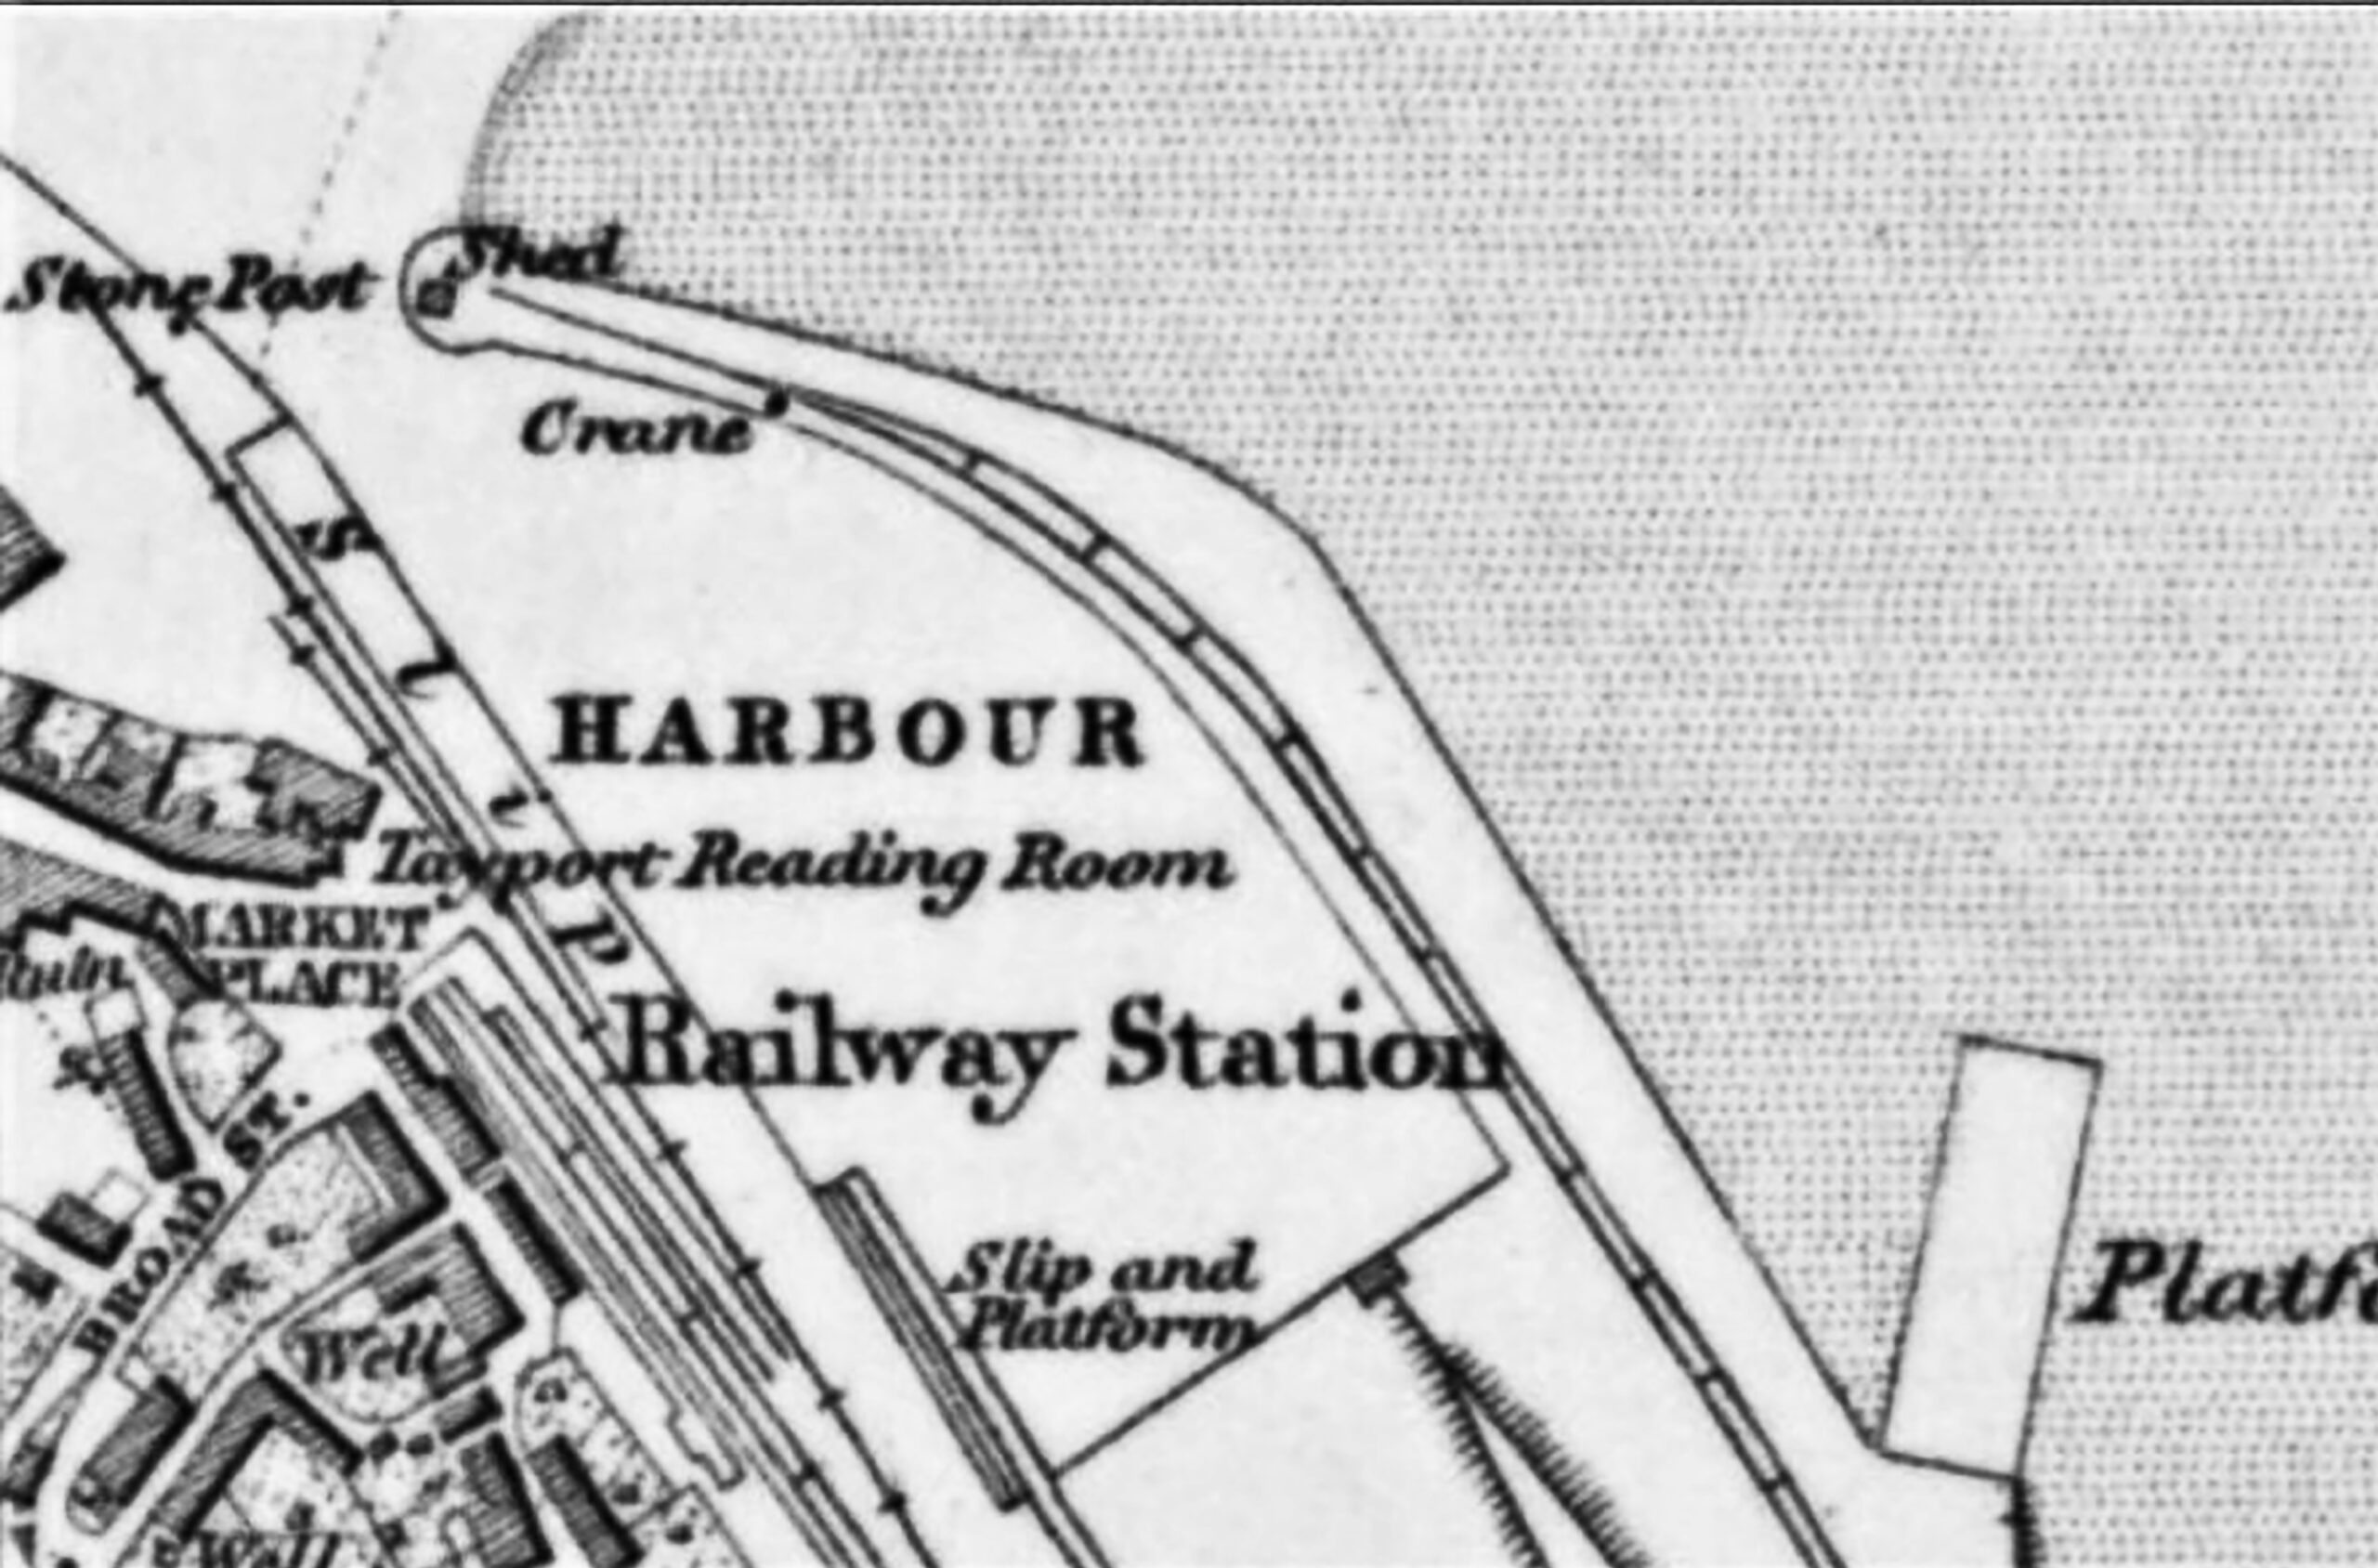 Tayport Heritage Trail - Board 1 - 1855 map of Market Place prior to Newport Railway Construction